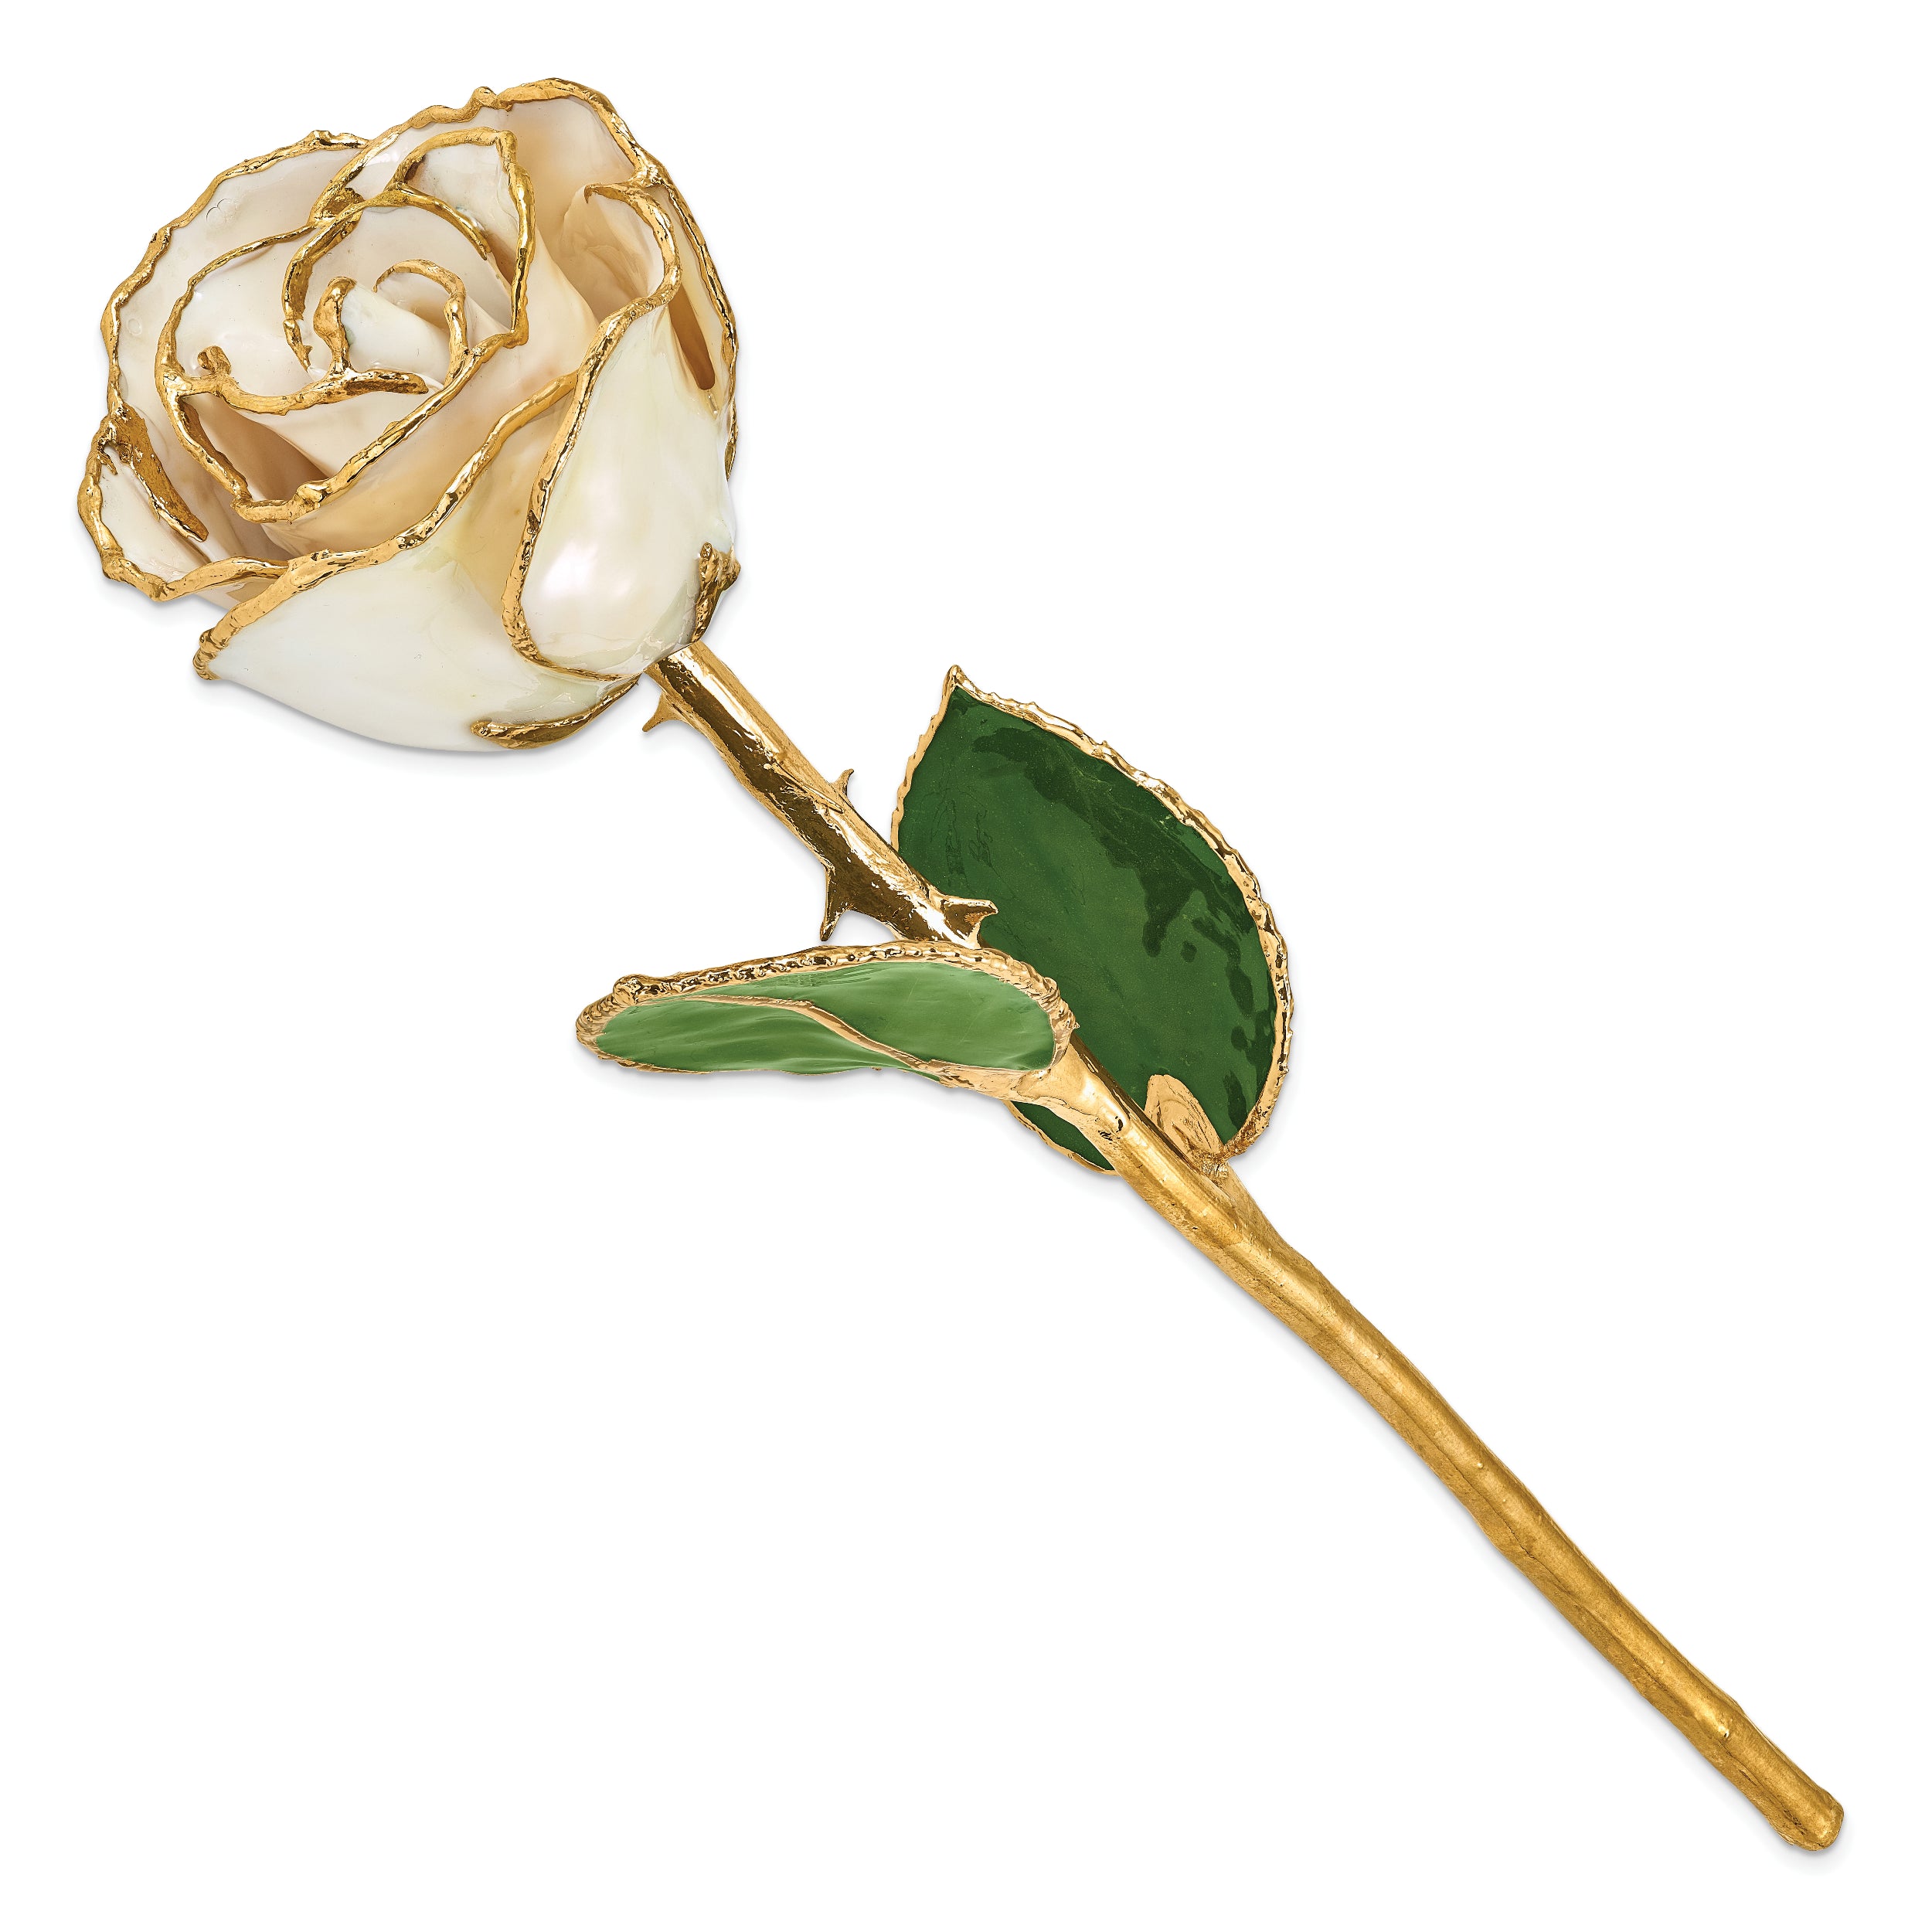 Lacquer Dipped Gold Trim White Satin Rose